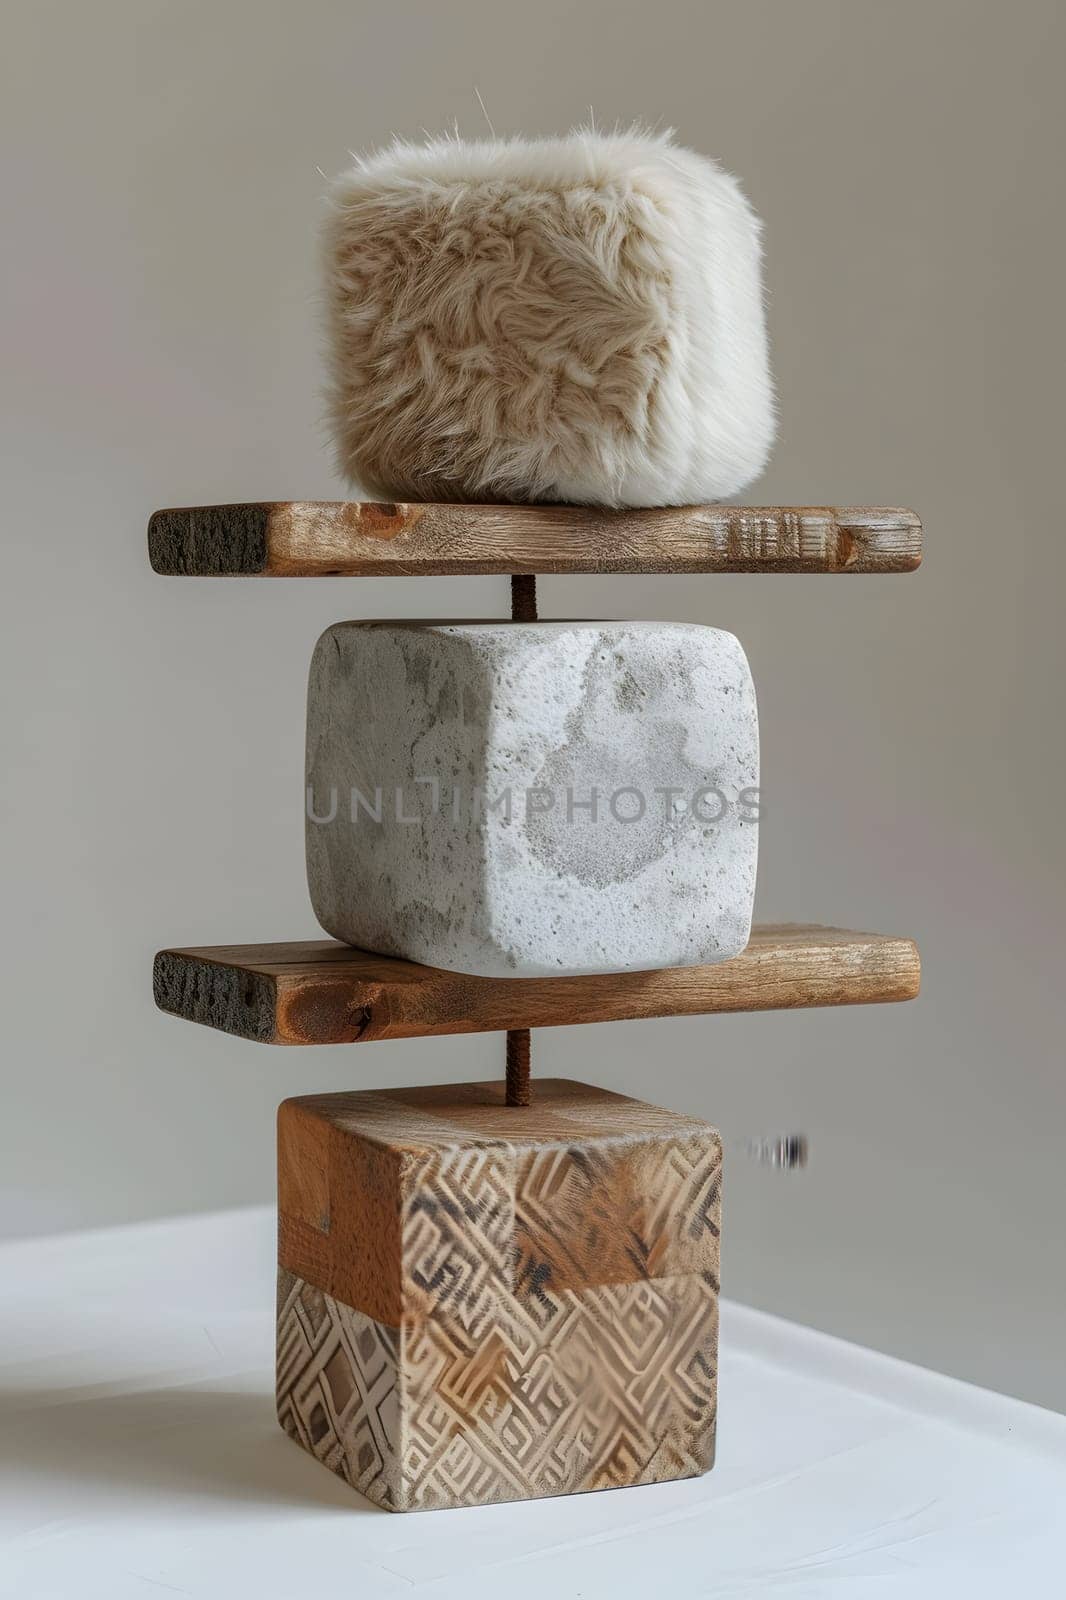 Three cubes stacked on a wooden shelf, showcasing natural material and art by Nadtochiy